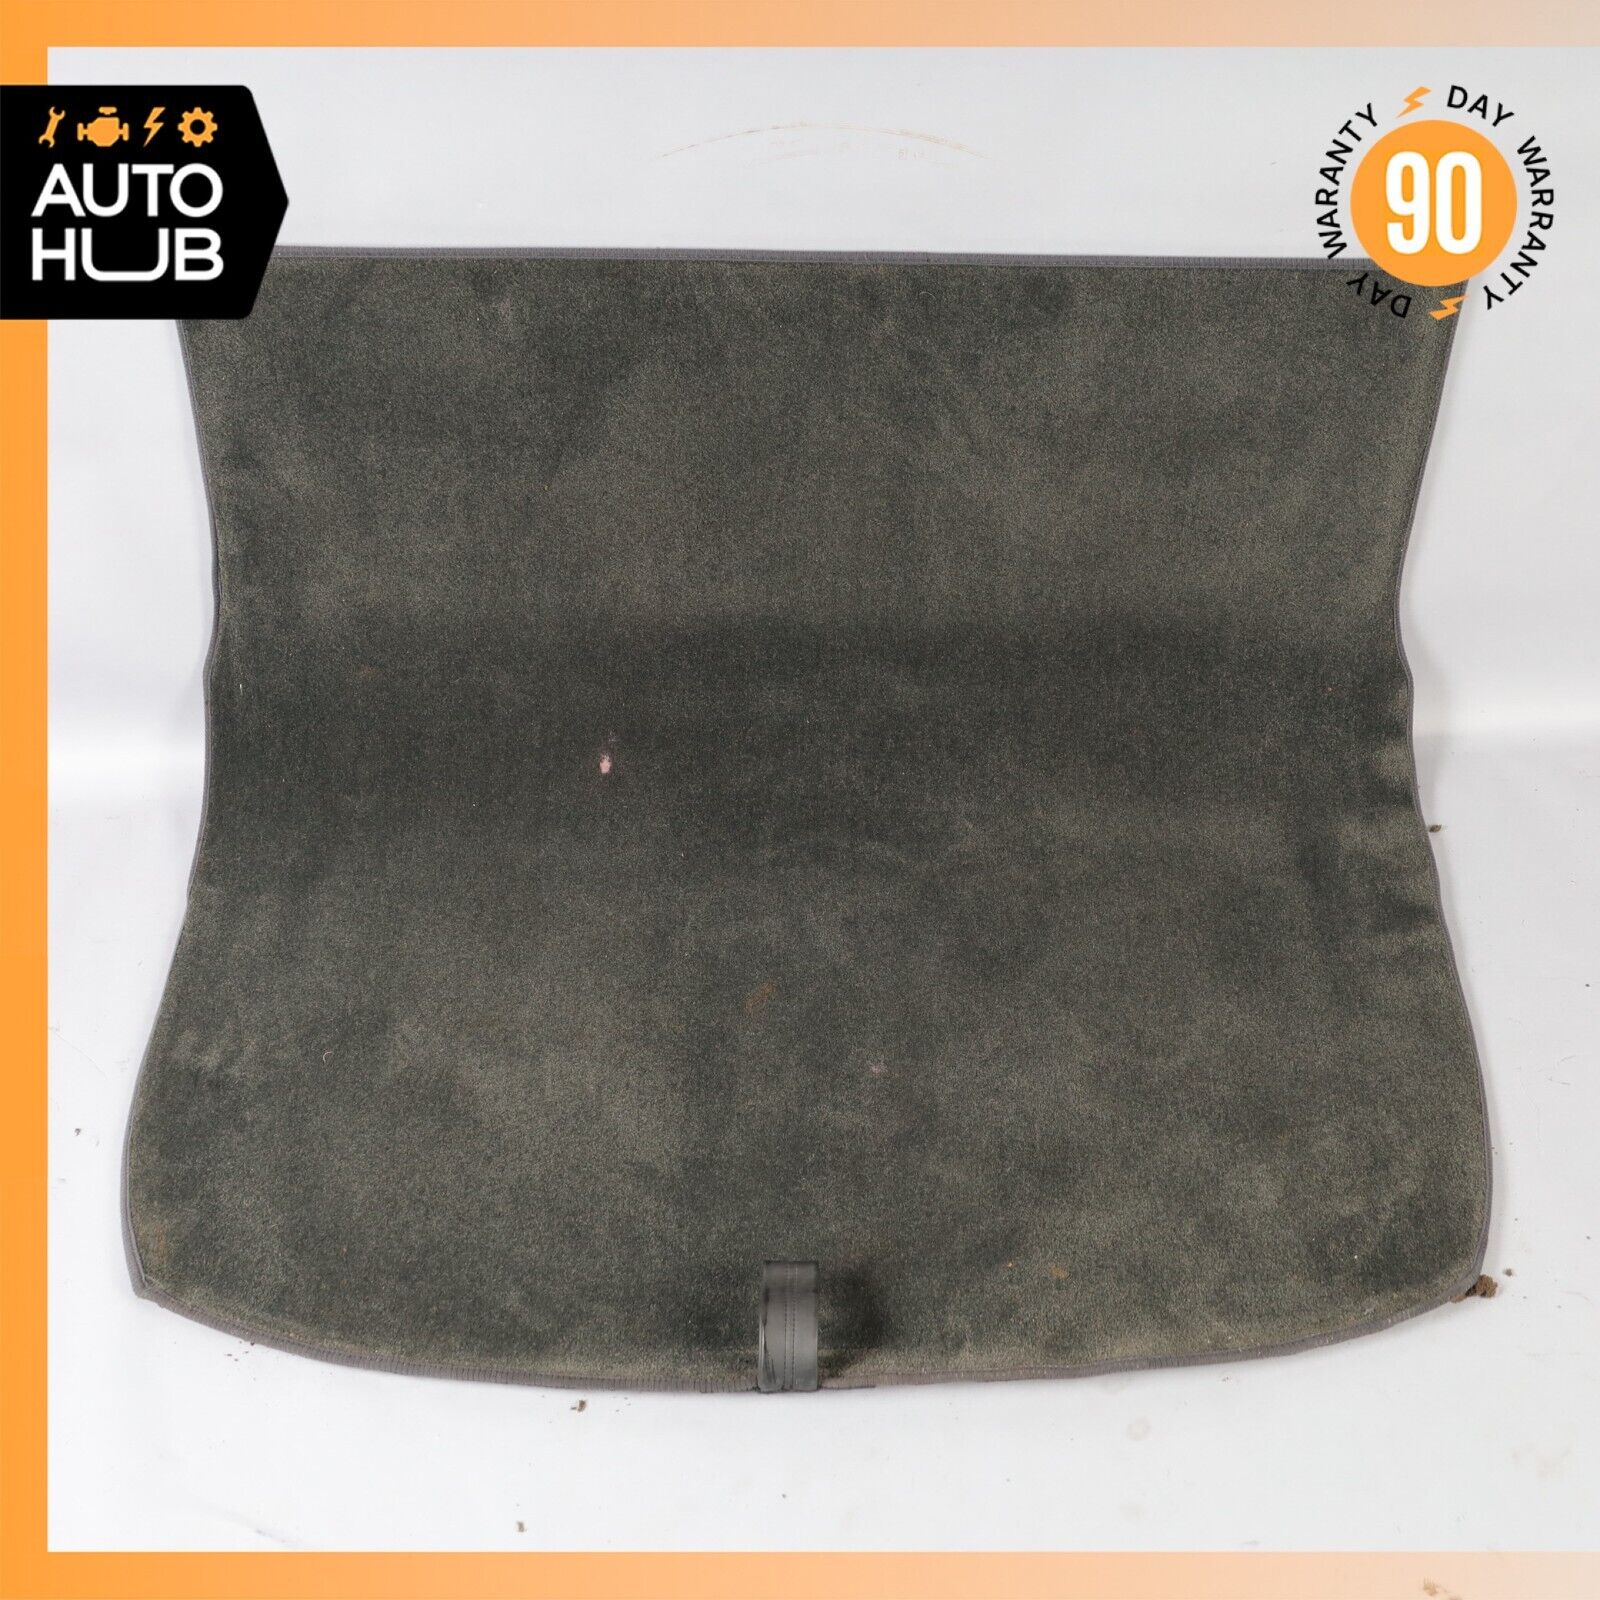 03-10 Bentley Continental GT Coupe Rear Trunk Floor Carpet Cover Panel OEM